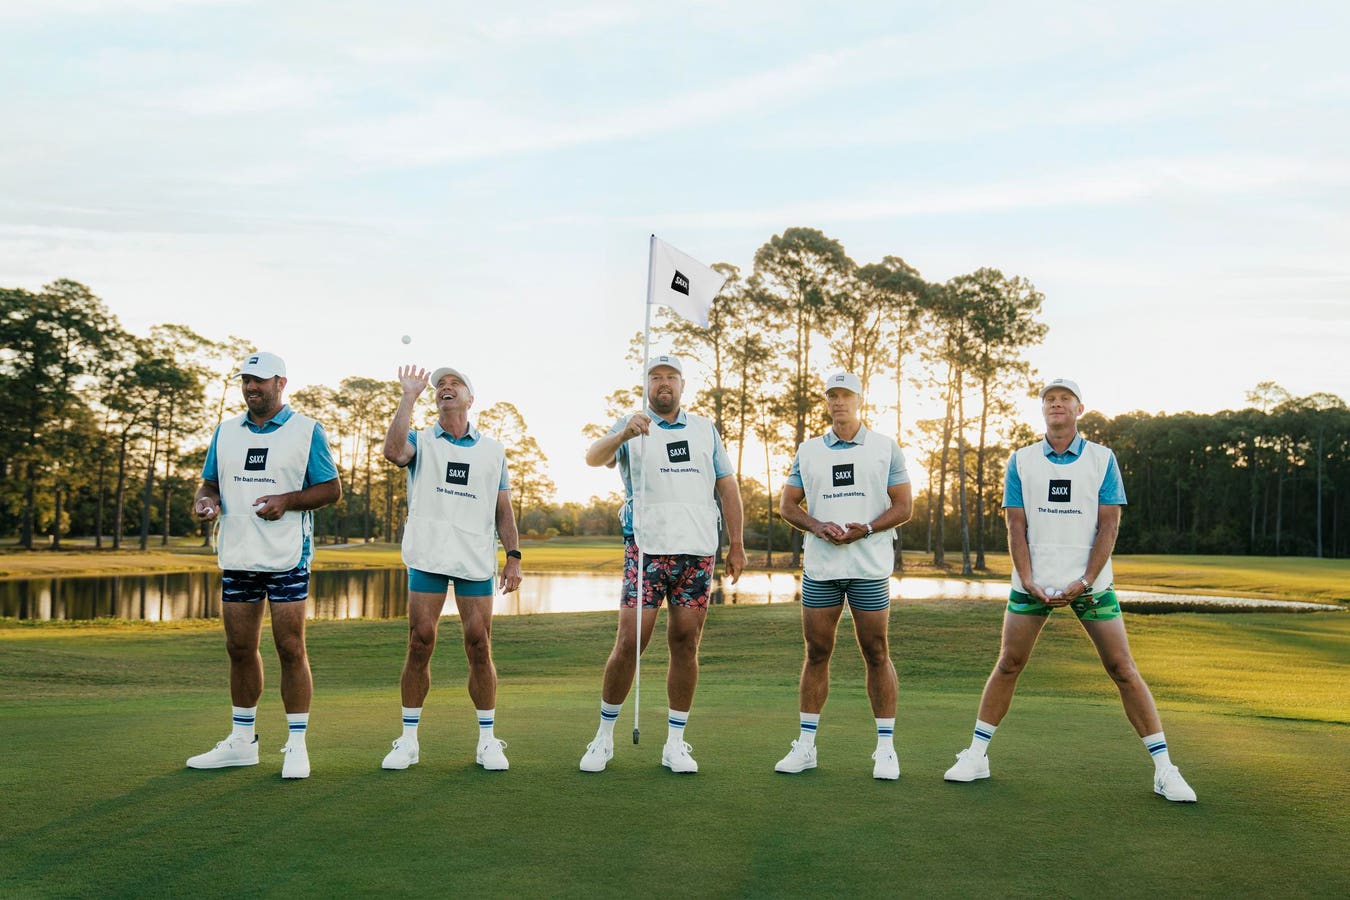 Here’s Why An Underwear Company Partnered With PGA Tour Caddies